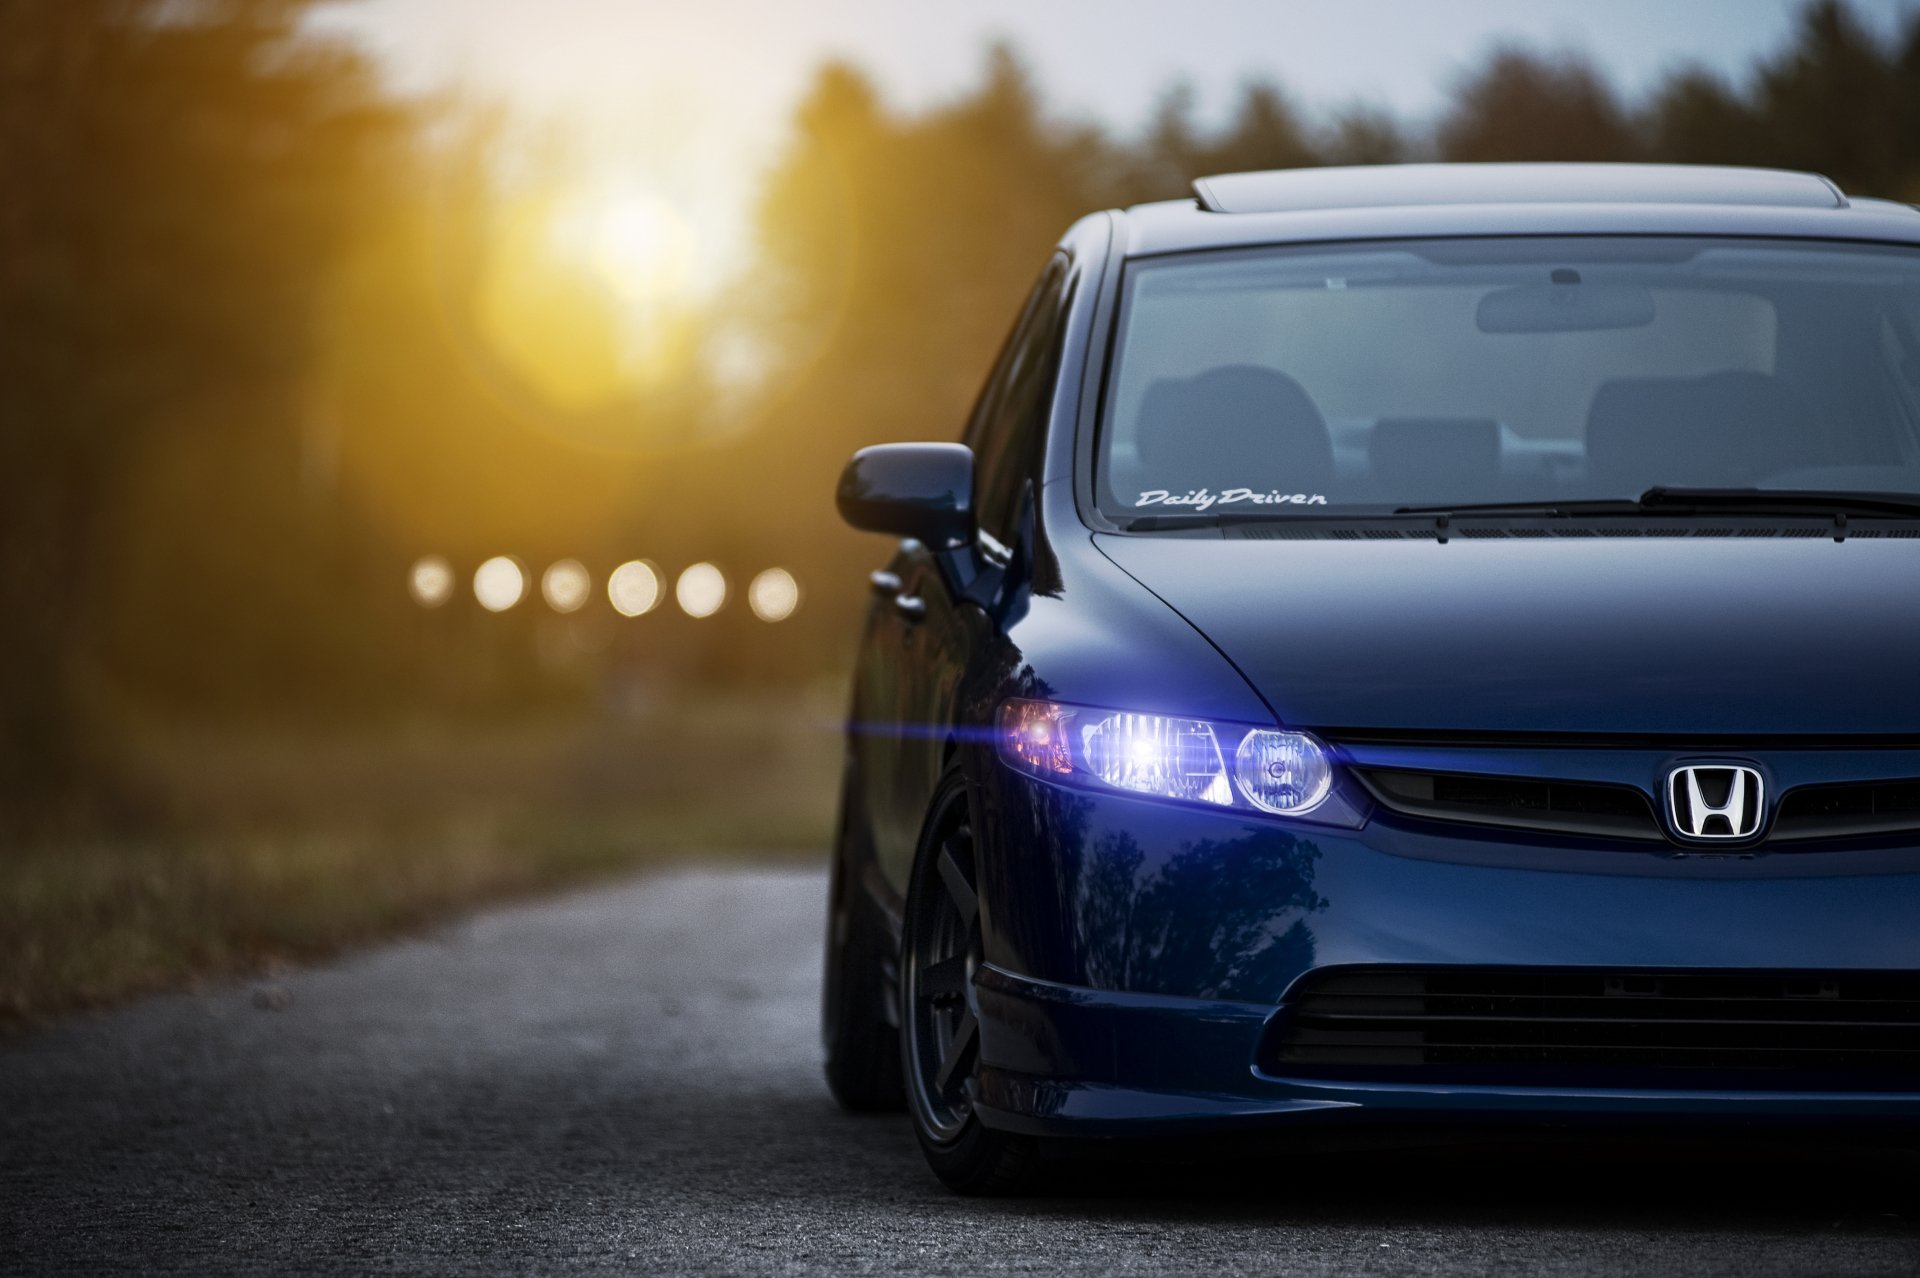 41 Honda Civic HD Wallpapers | Background Images - Wallpaper Abyss